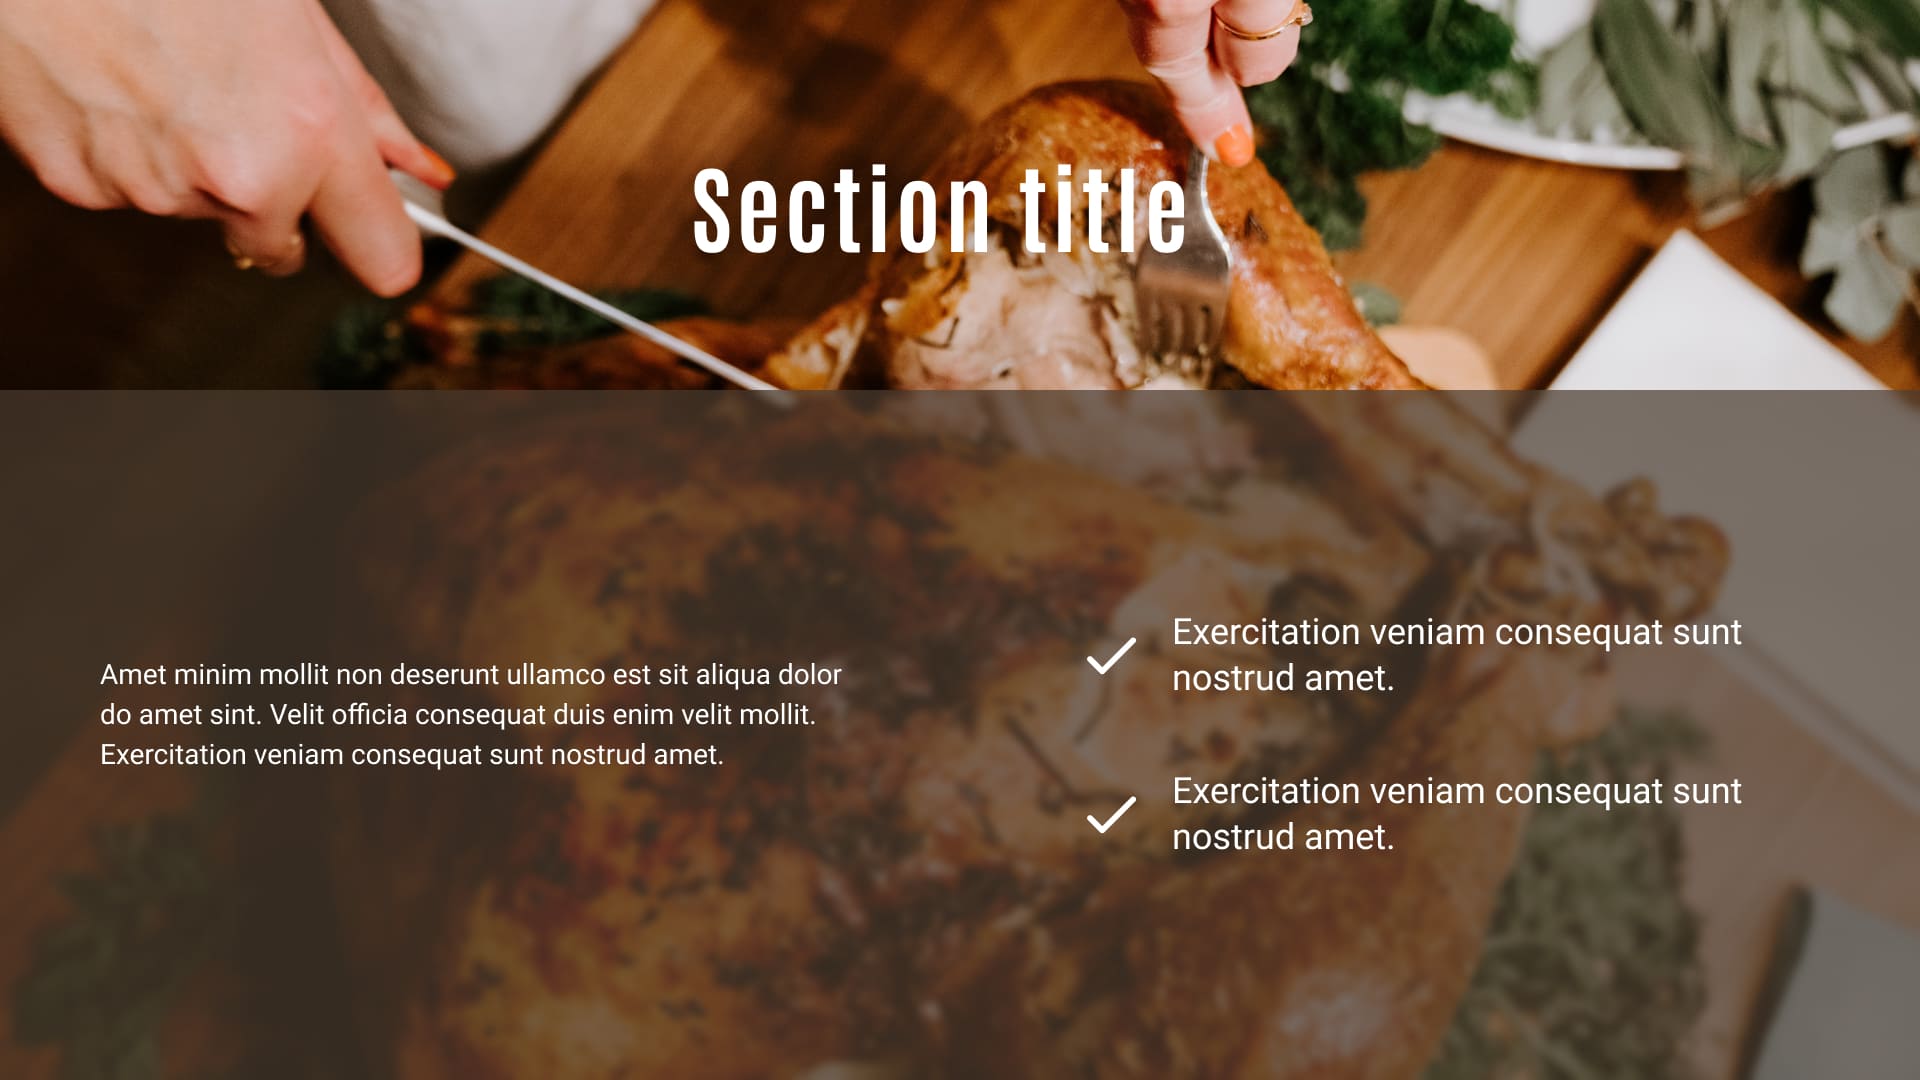 4 Preview Free Thanksgiving Background Images for Powerpoint.